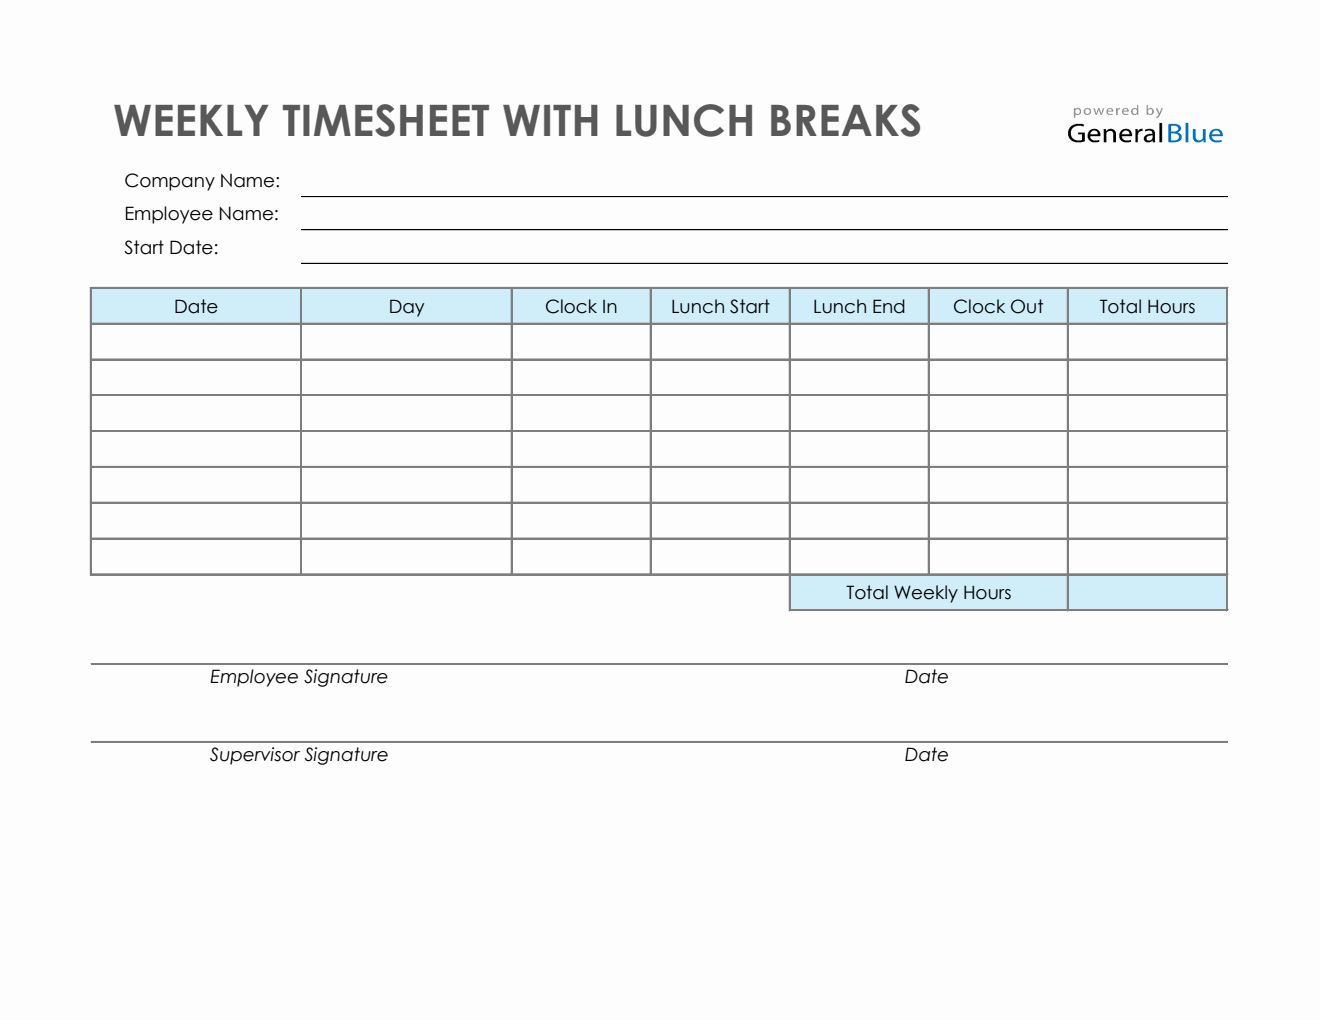 Weekly Timesheet With Lunch Breaks in Excel